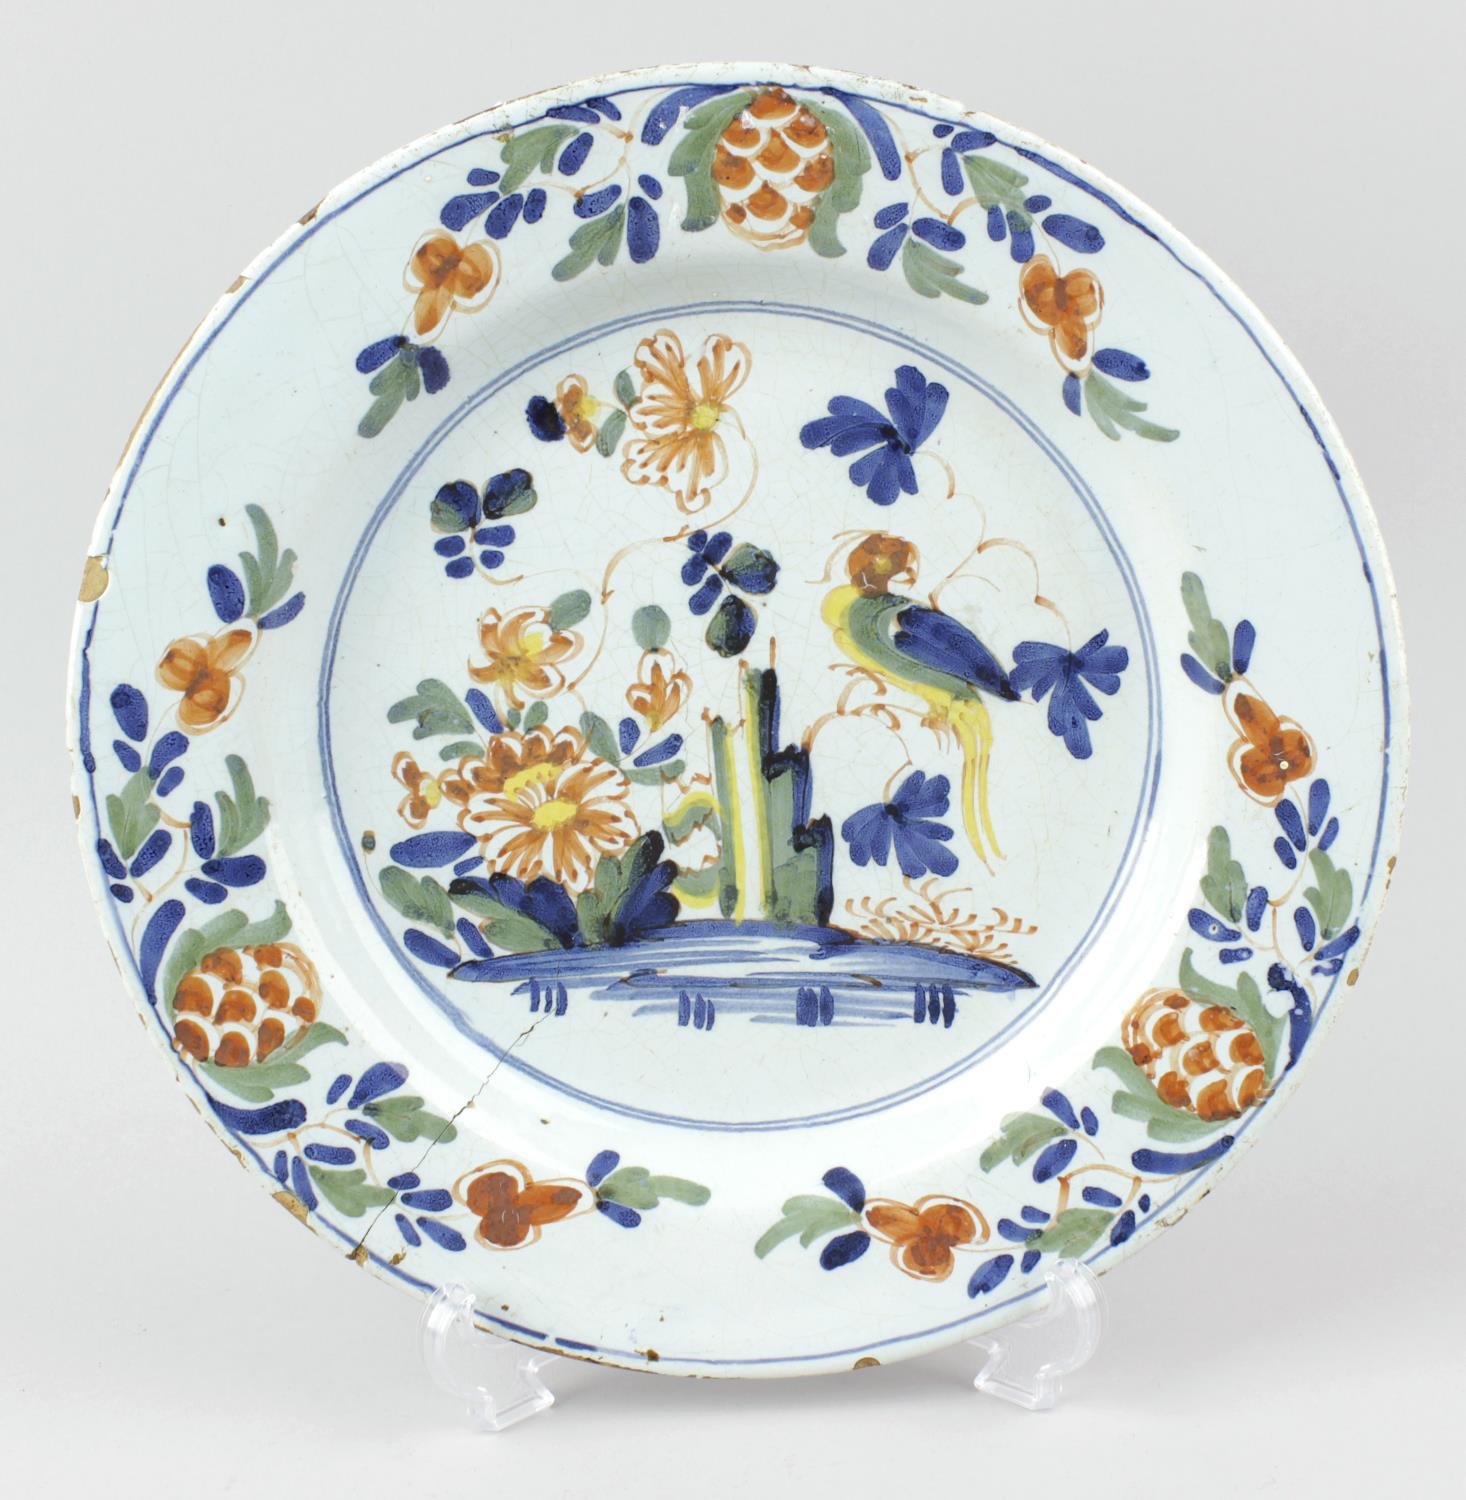 A mid 18th century English polychrome delftware plate. Probably London or Bristol, the circular